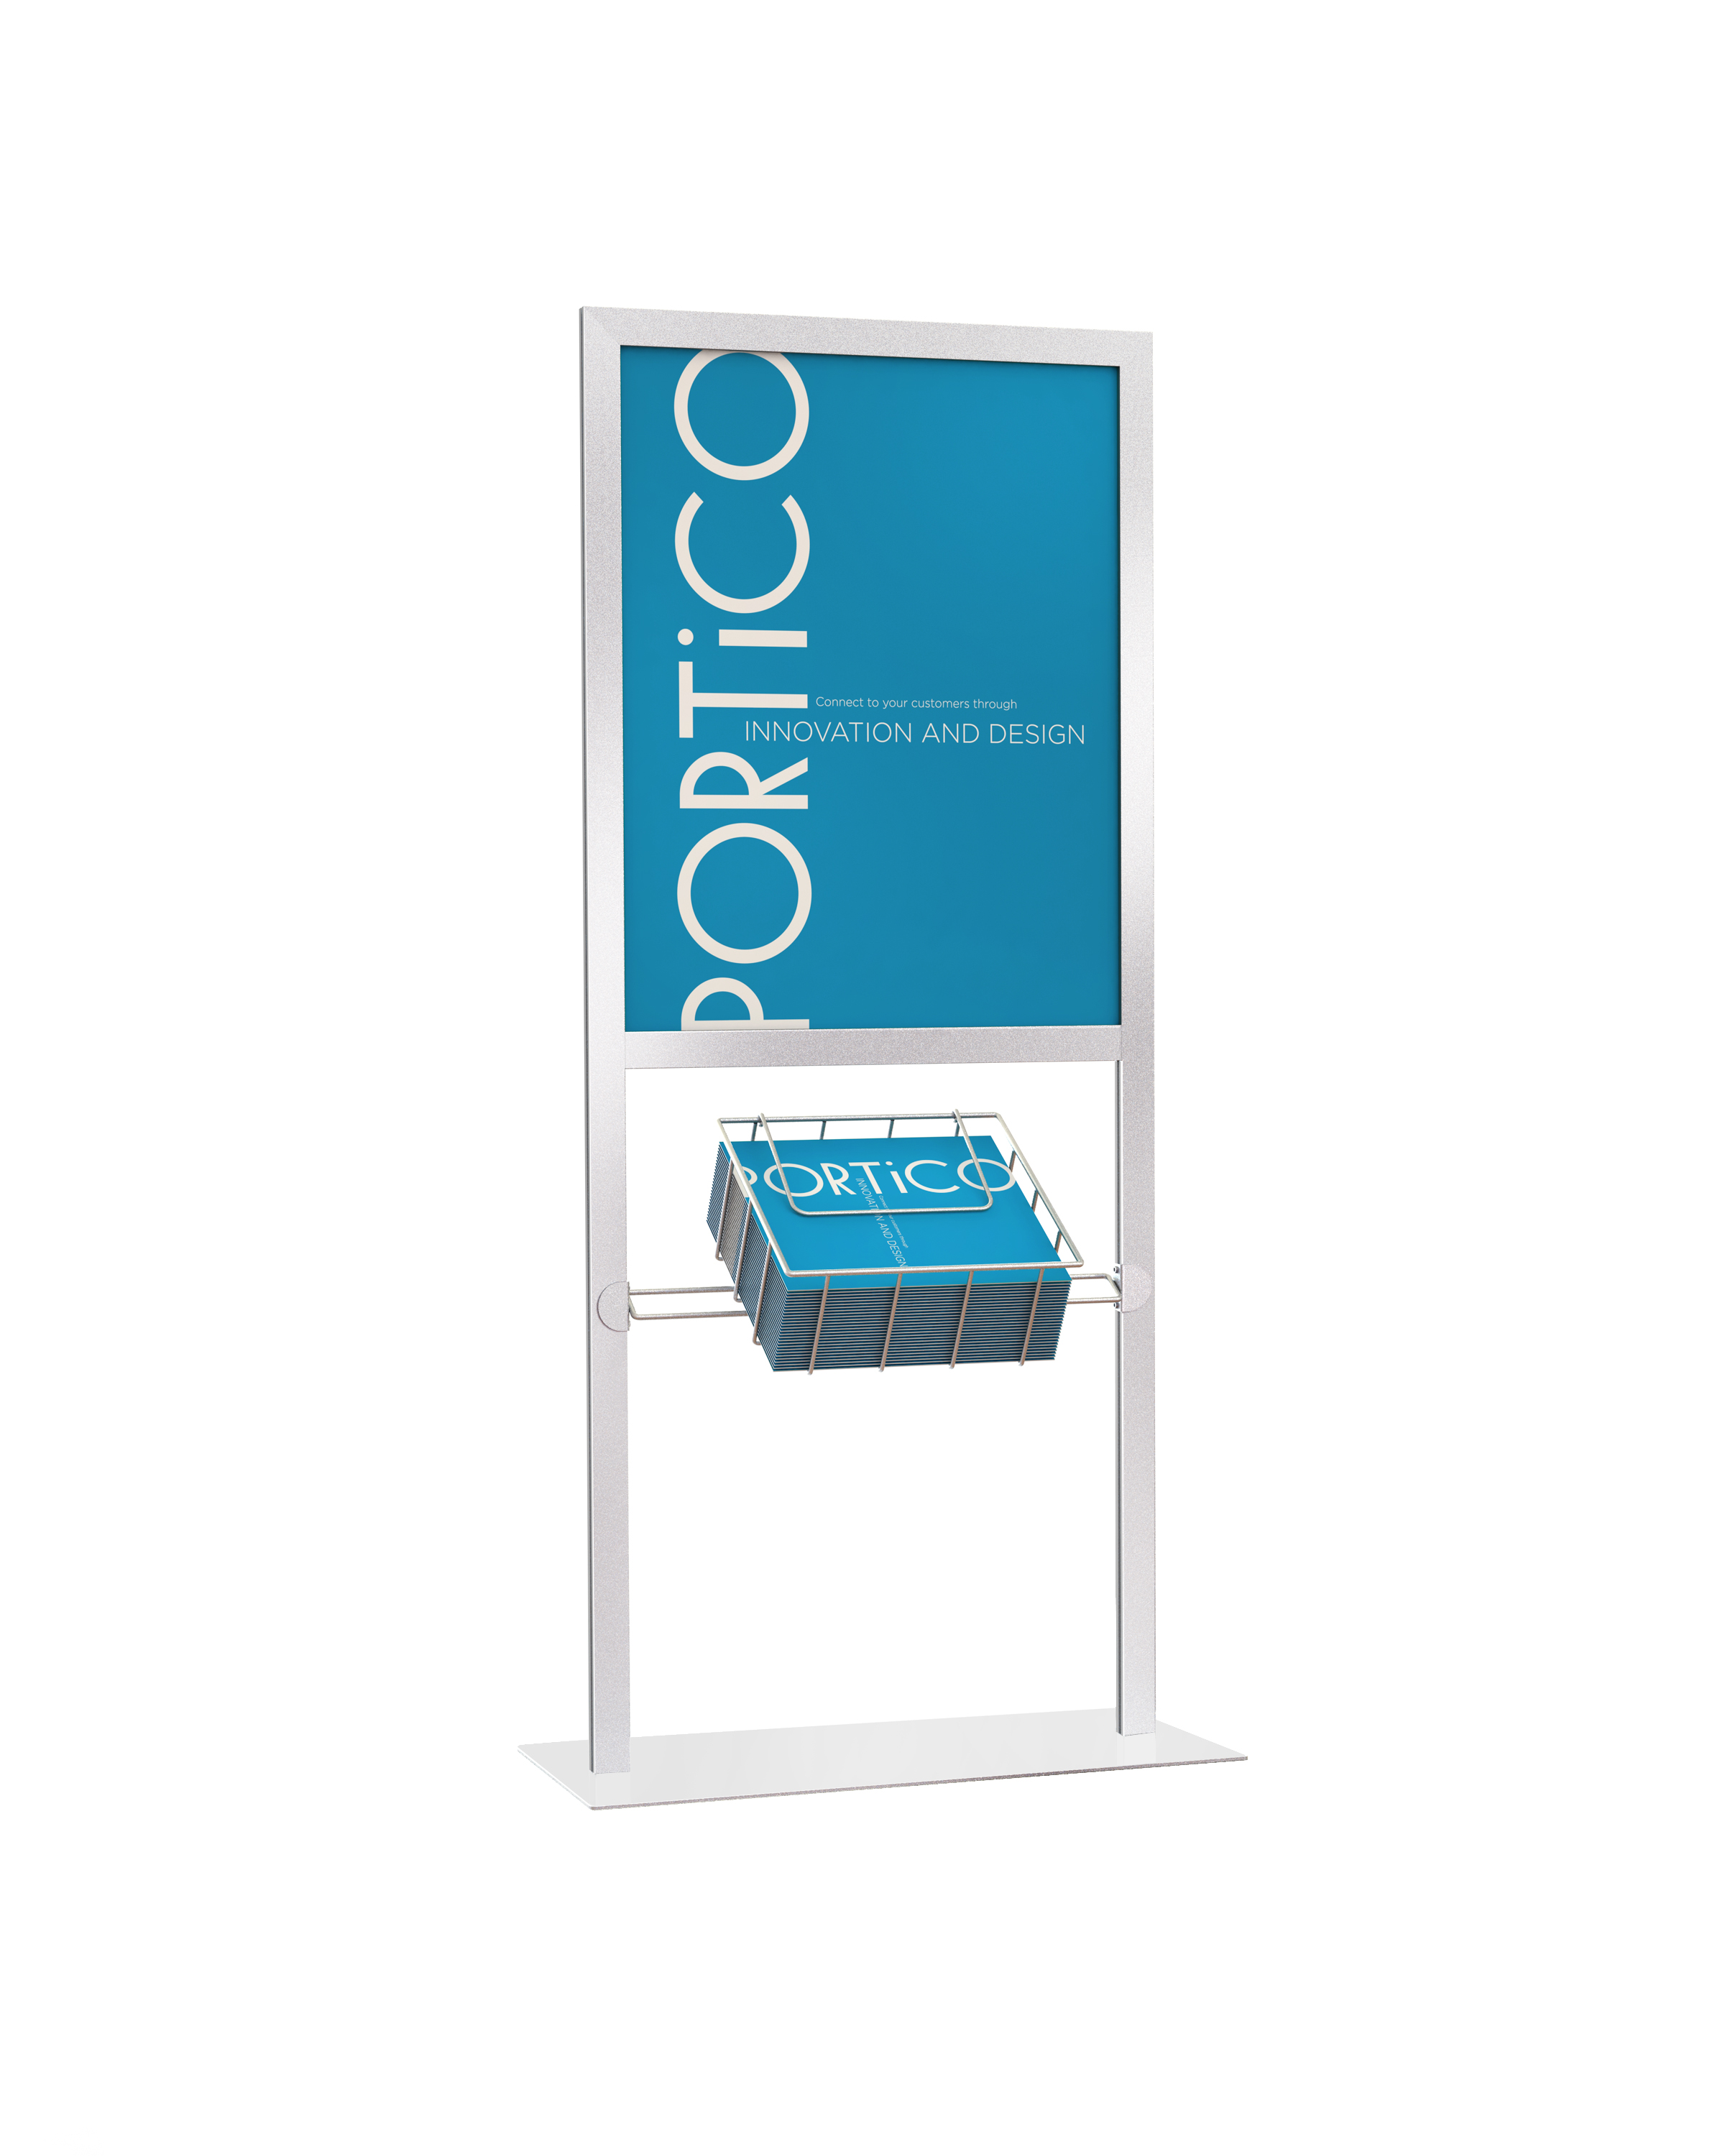 22x28 sign holder with angled flyer basket by Portico Merchandising